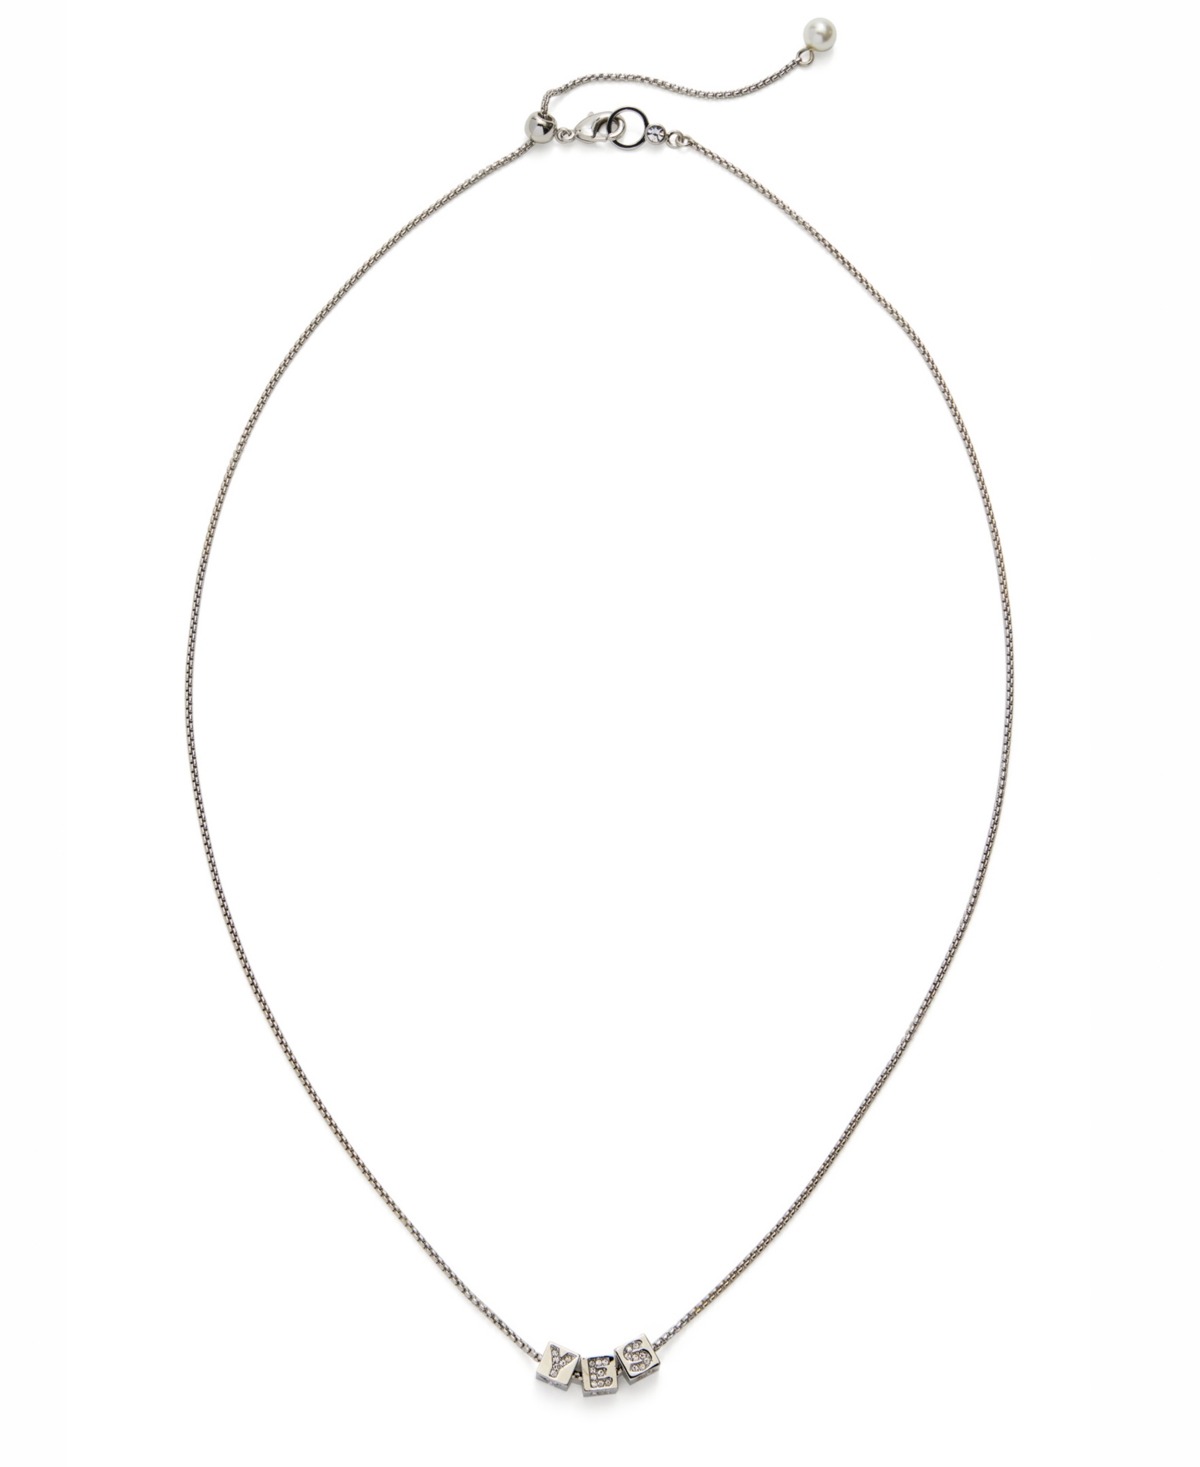 Kleinfeld Faux Stone Pave Yes Block Bib Necklace In Crystal,rhodium